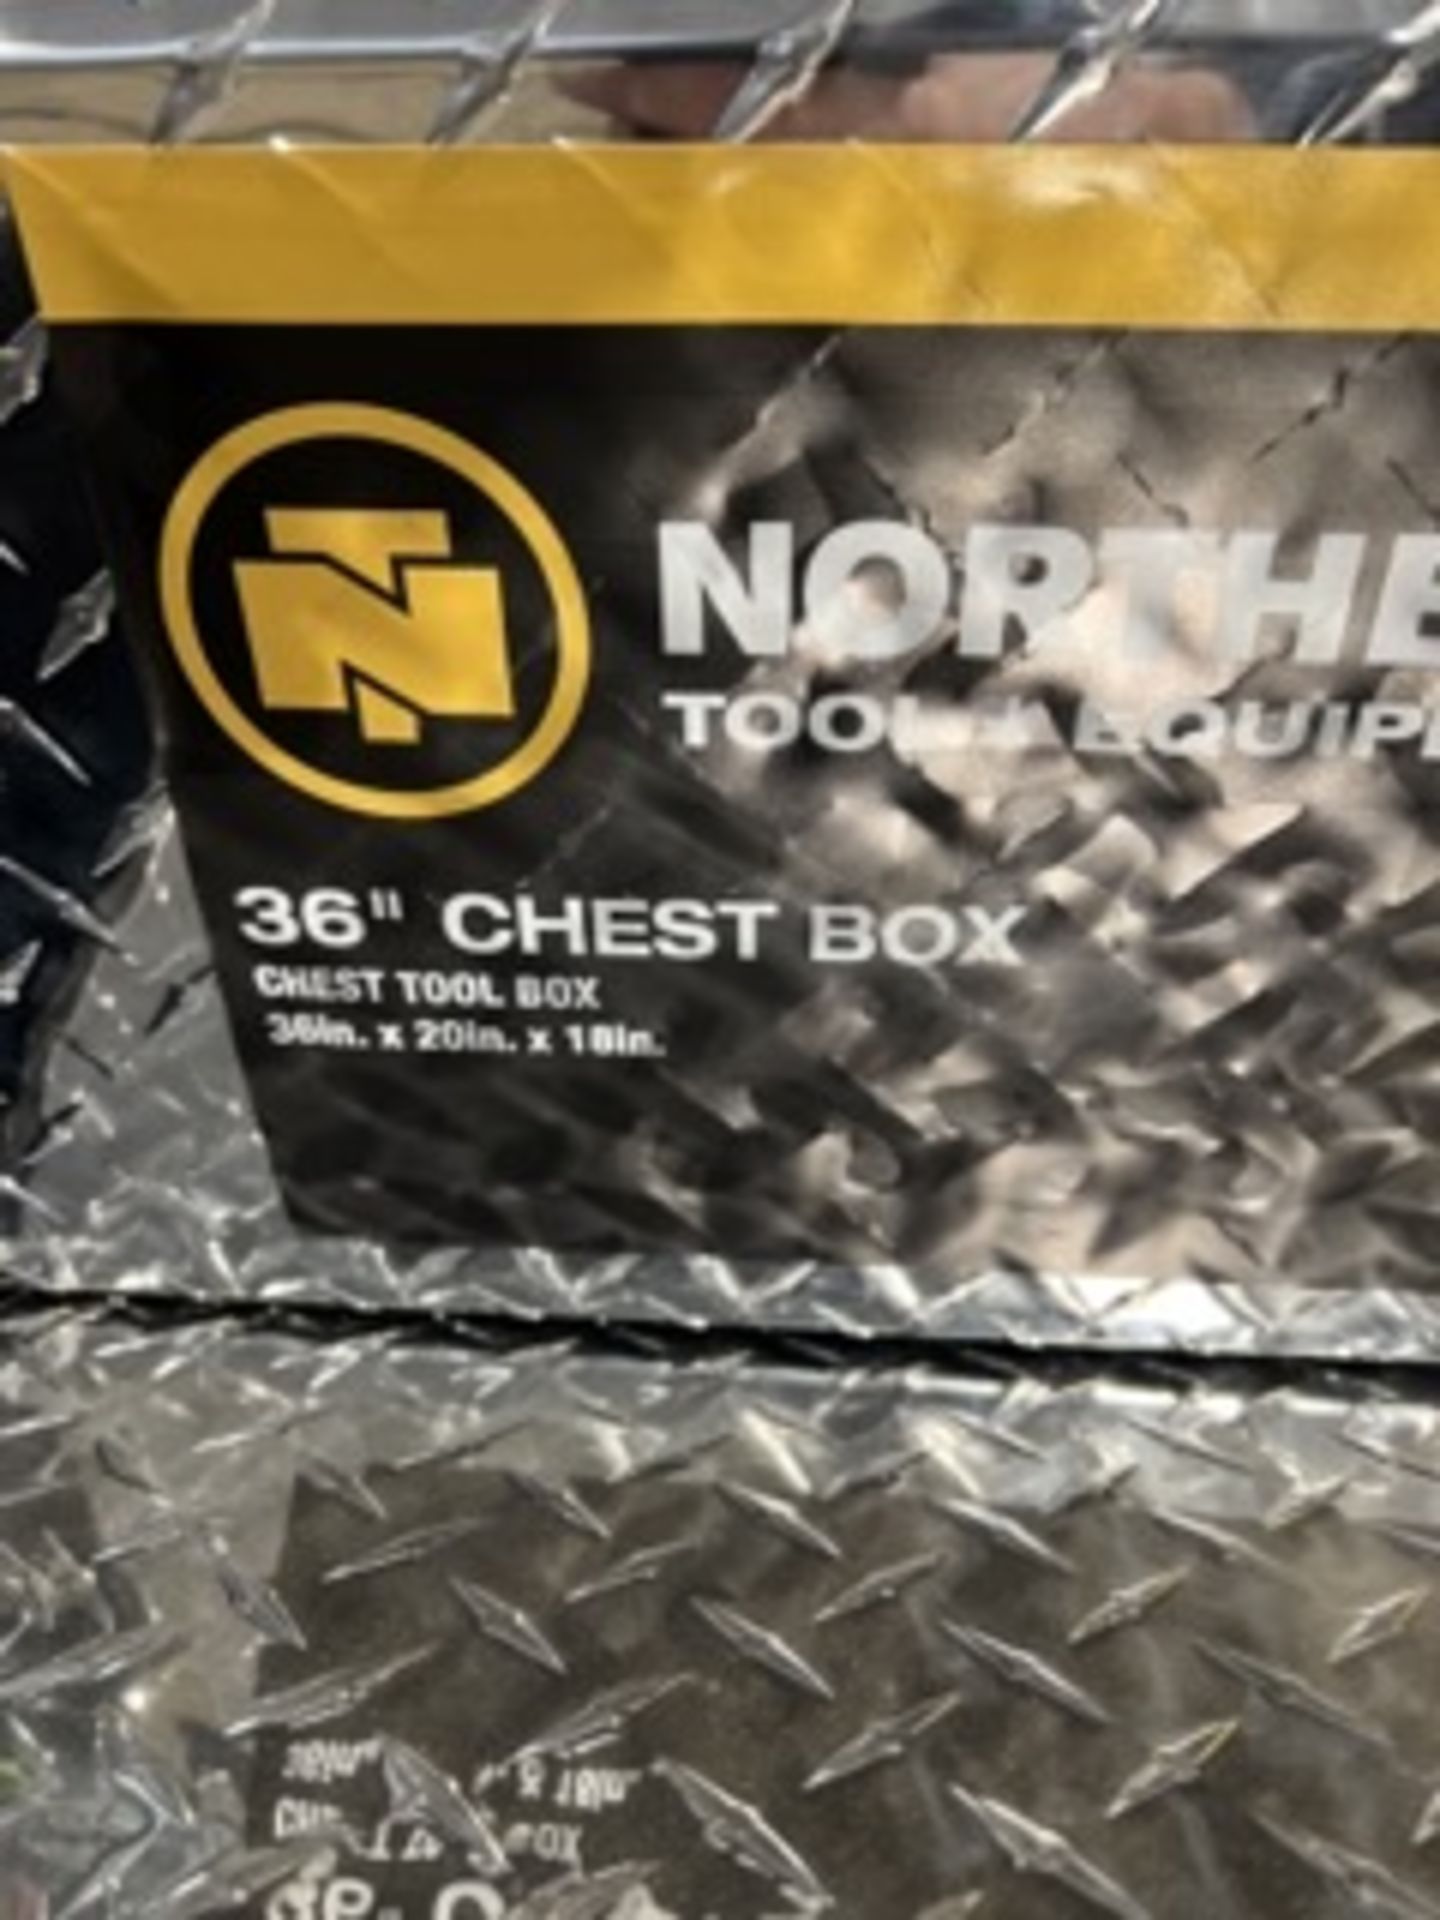 36" Chest Tool Box - Image 2 of 4